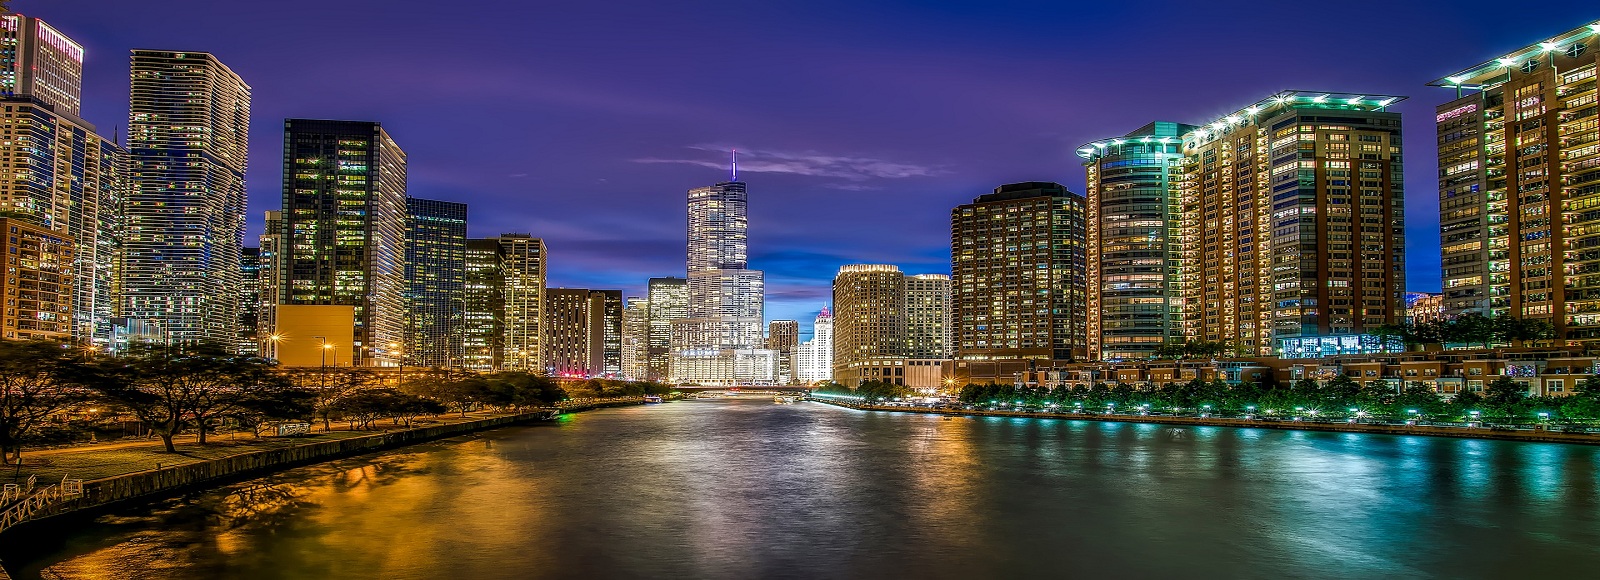 Cheap Flight Fares to Chicago. Flight Tickets Discounts to Chicago 